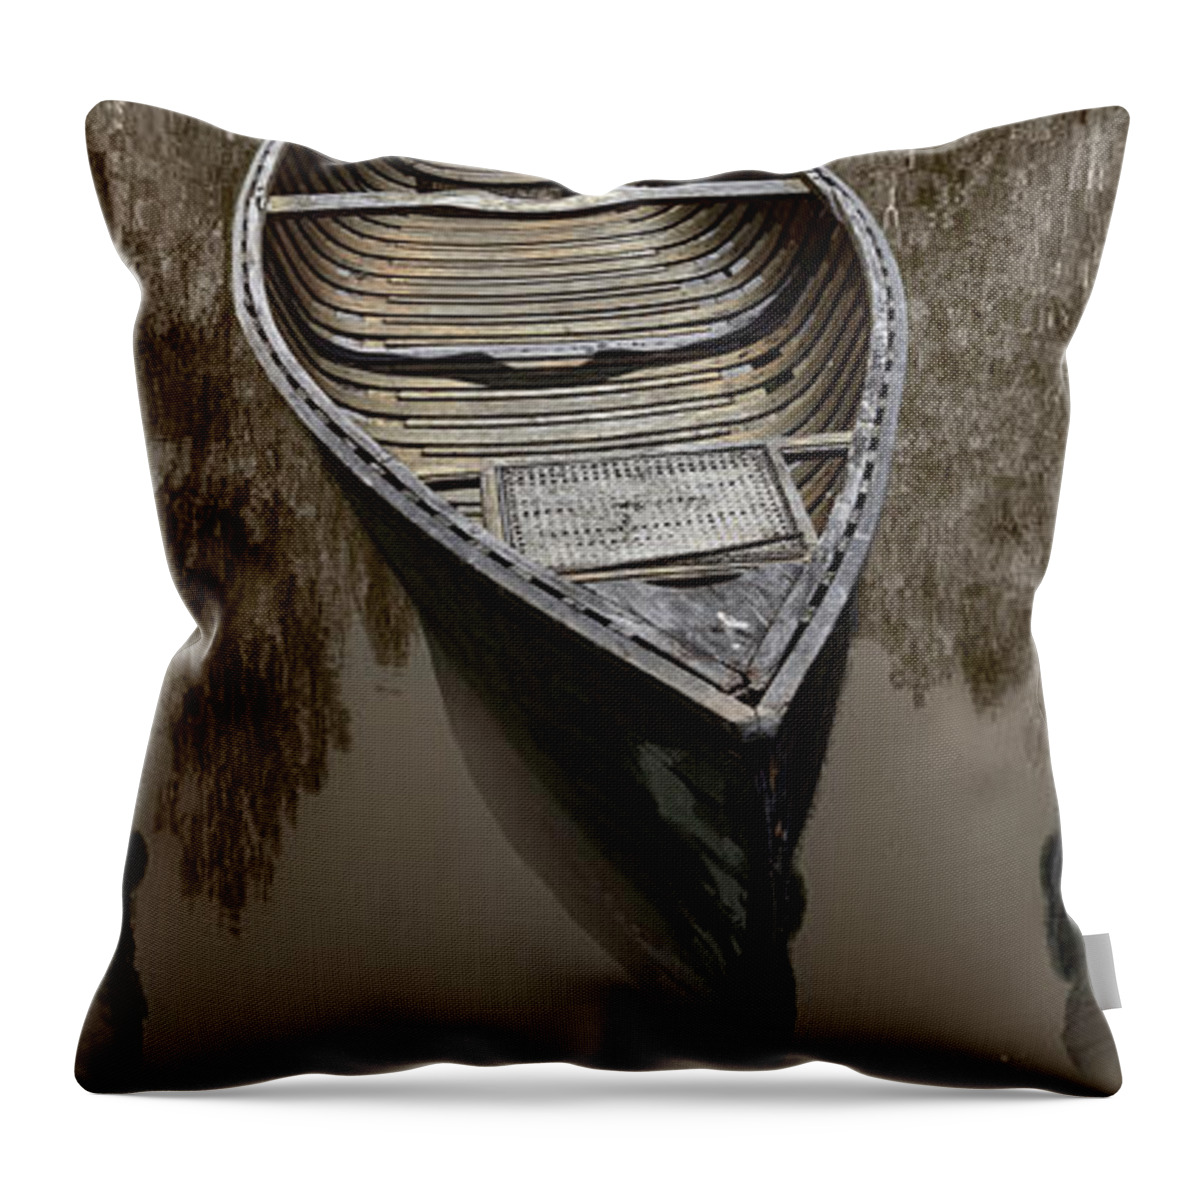 Appalachia Throw Pillow featuring the photograph Three Old Canoes Panorama by Debra and Dave Vanderlaan